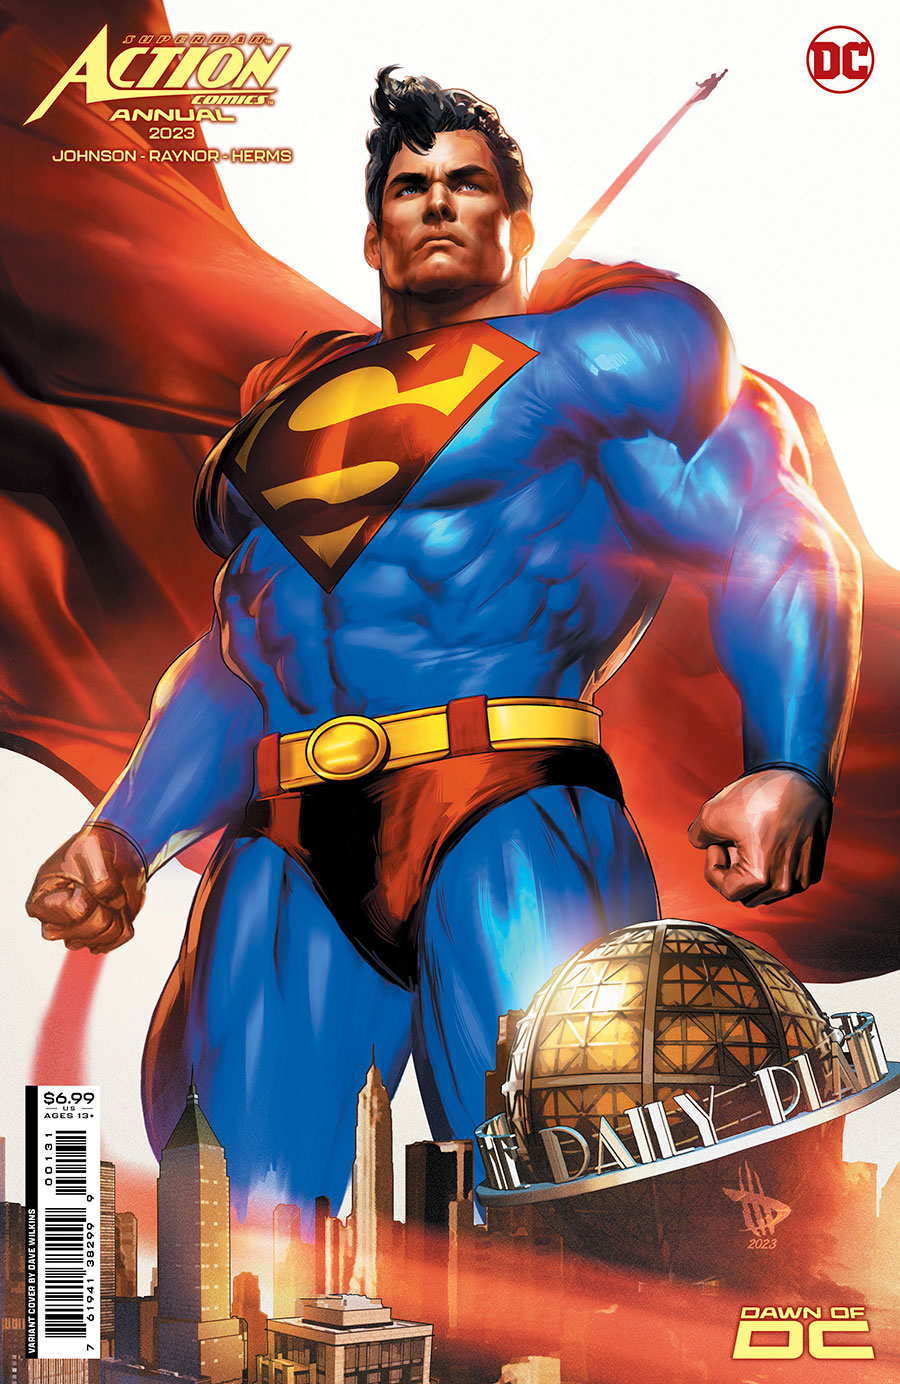 Action Comics 2023 Annual #1 Preview - The Aspiring Kryptonian ...